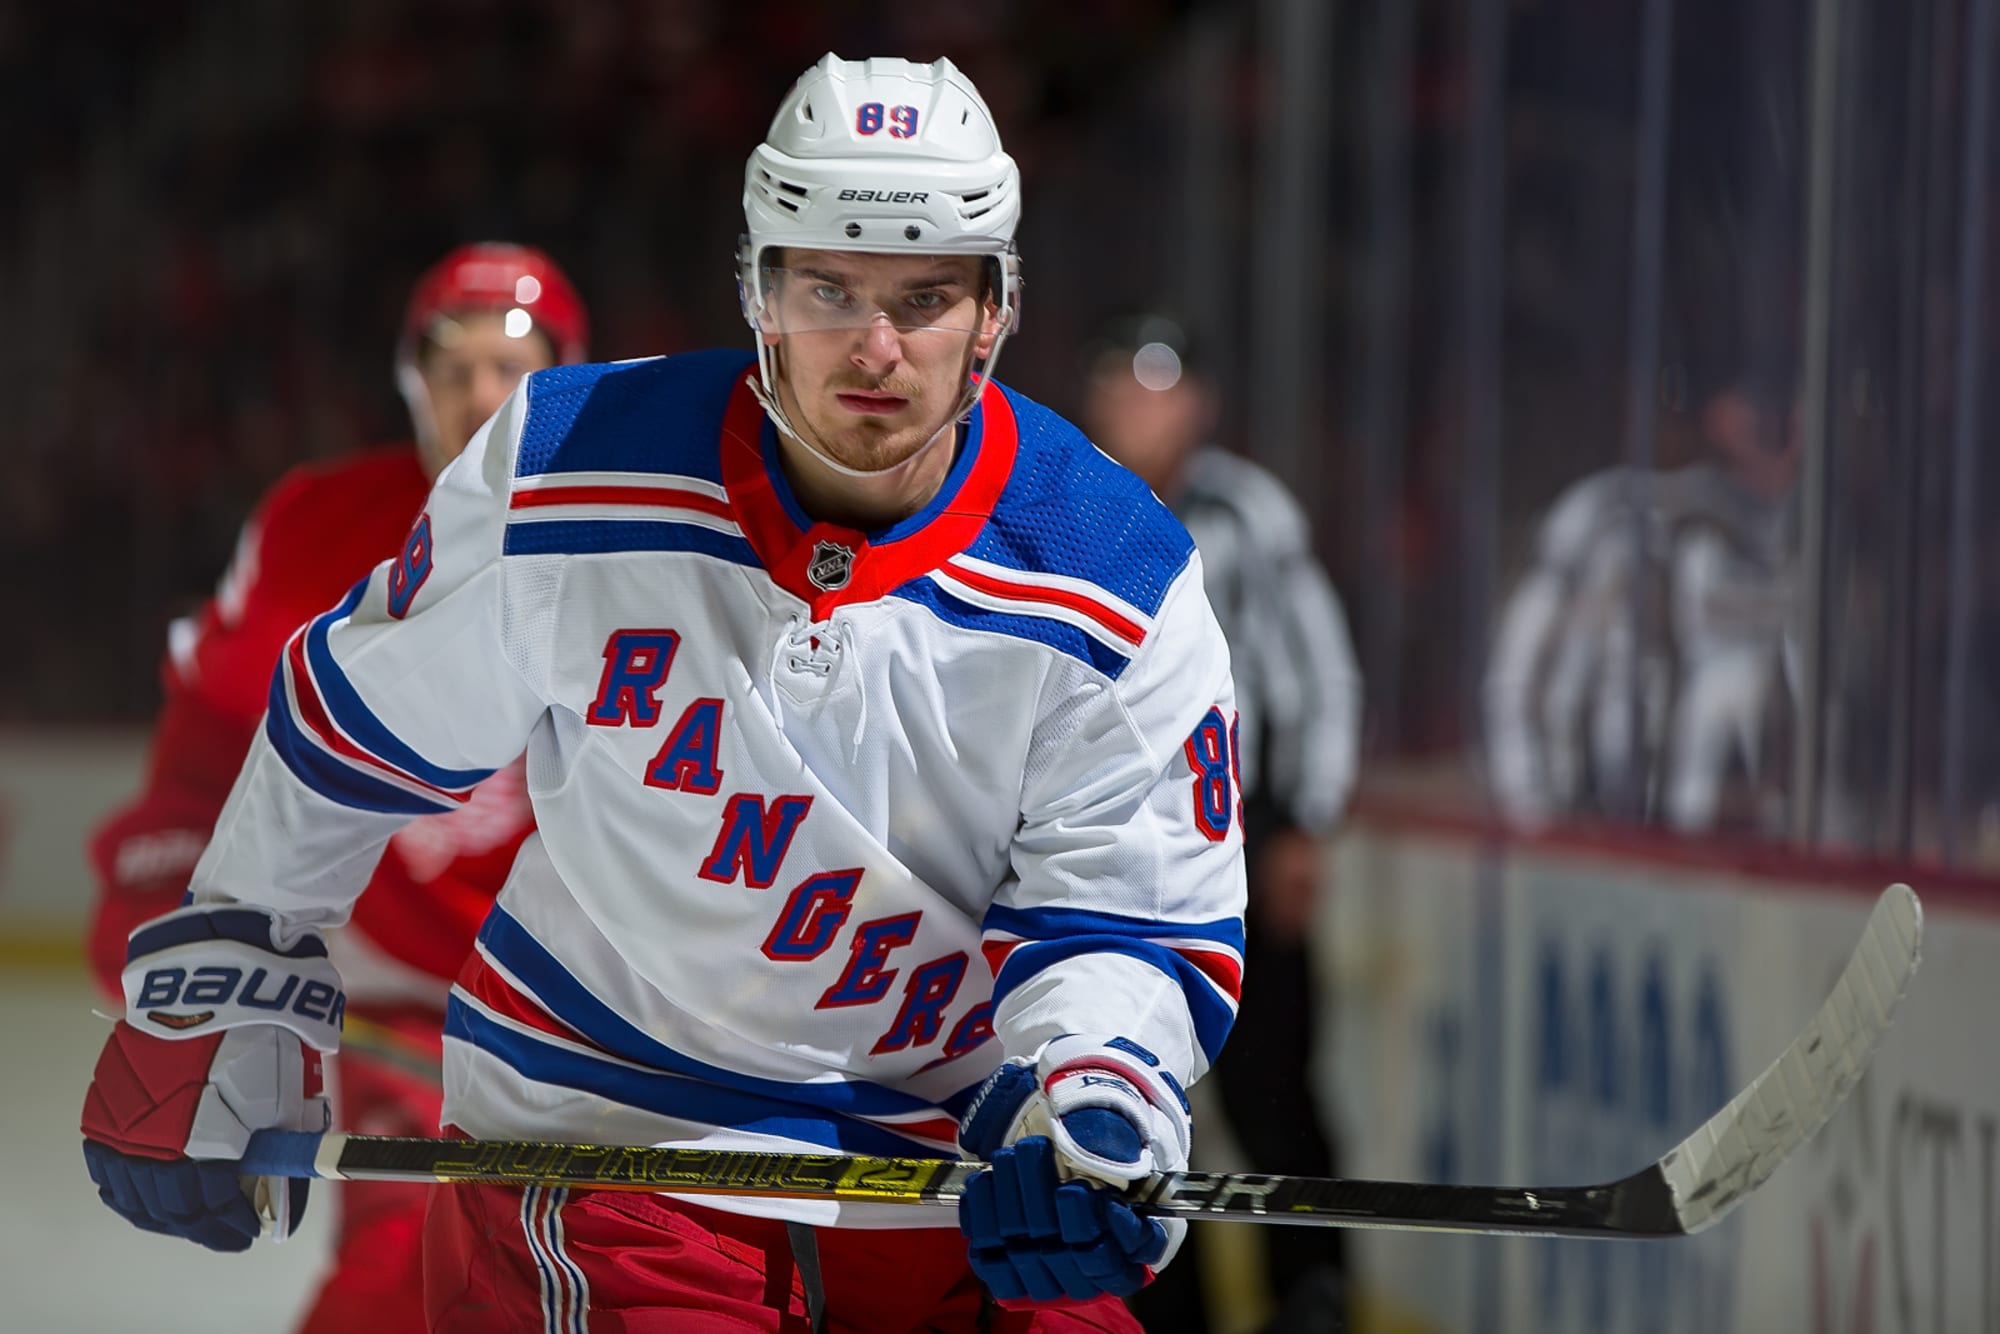 OFFICIAL: #NYR Pavel Buchnevich - New York Rangers